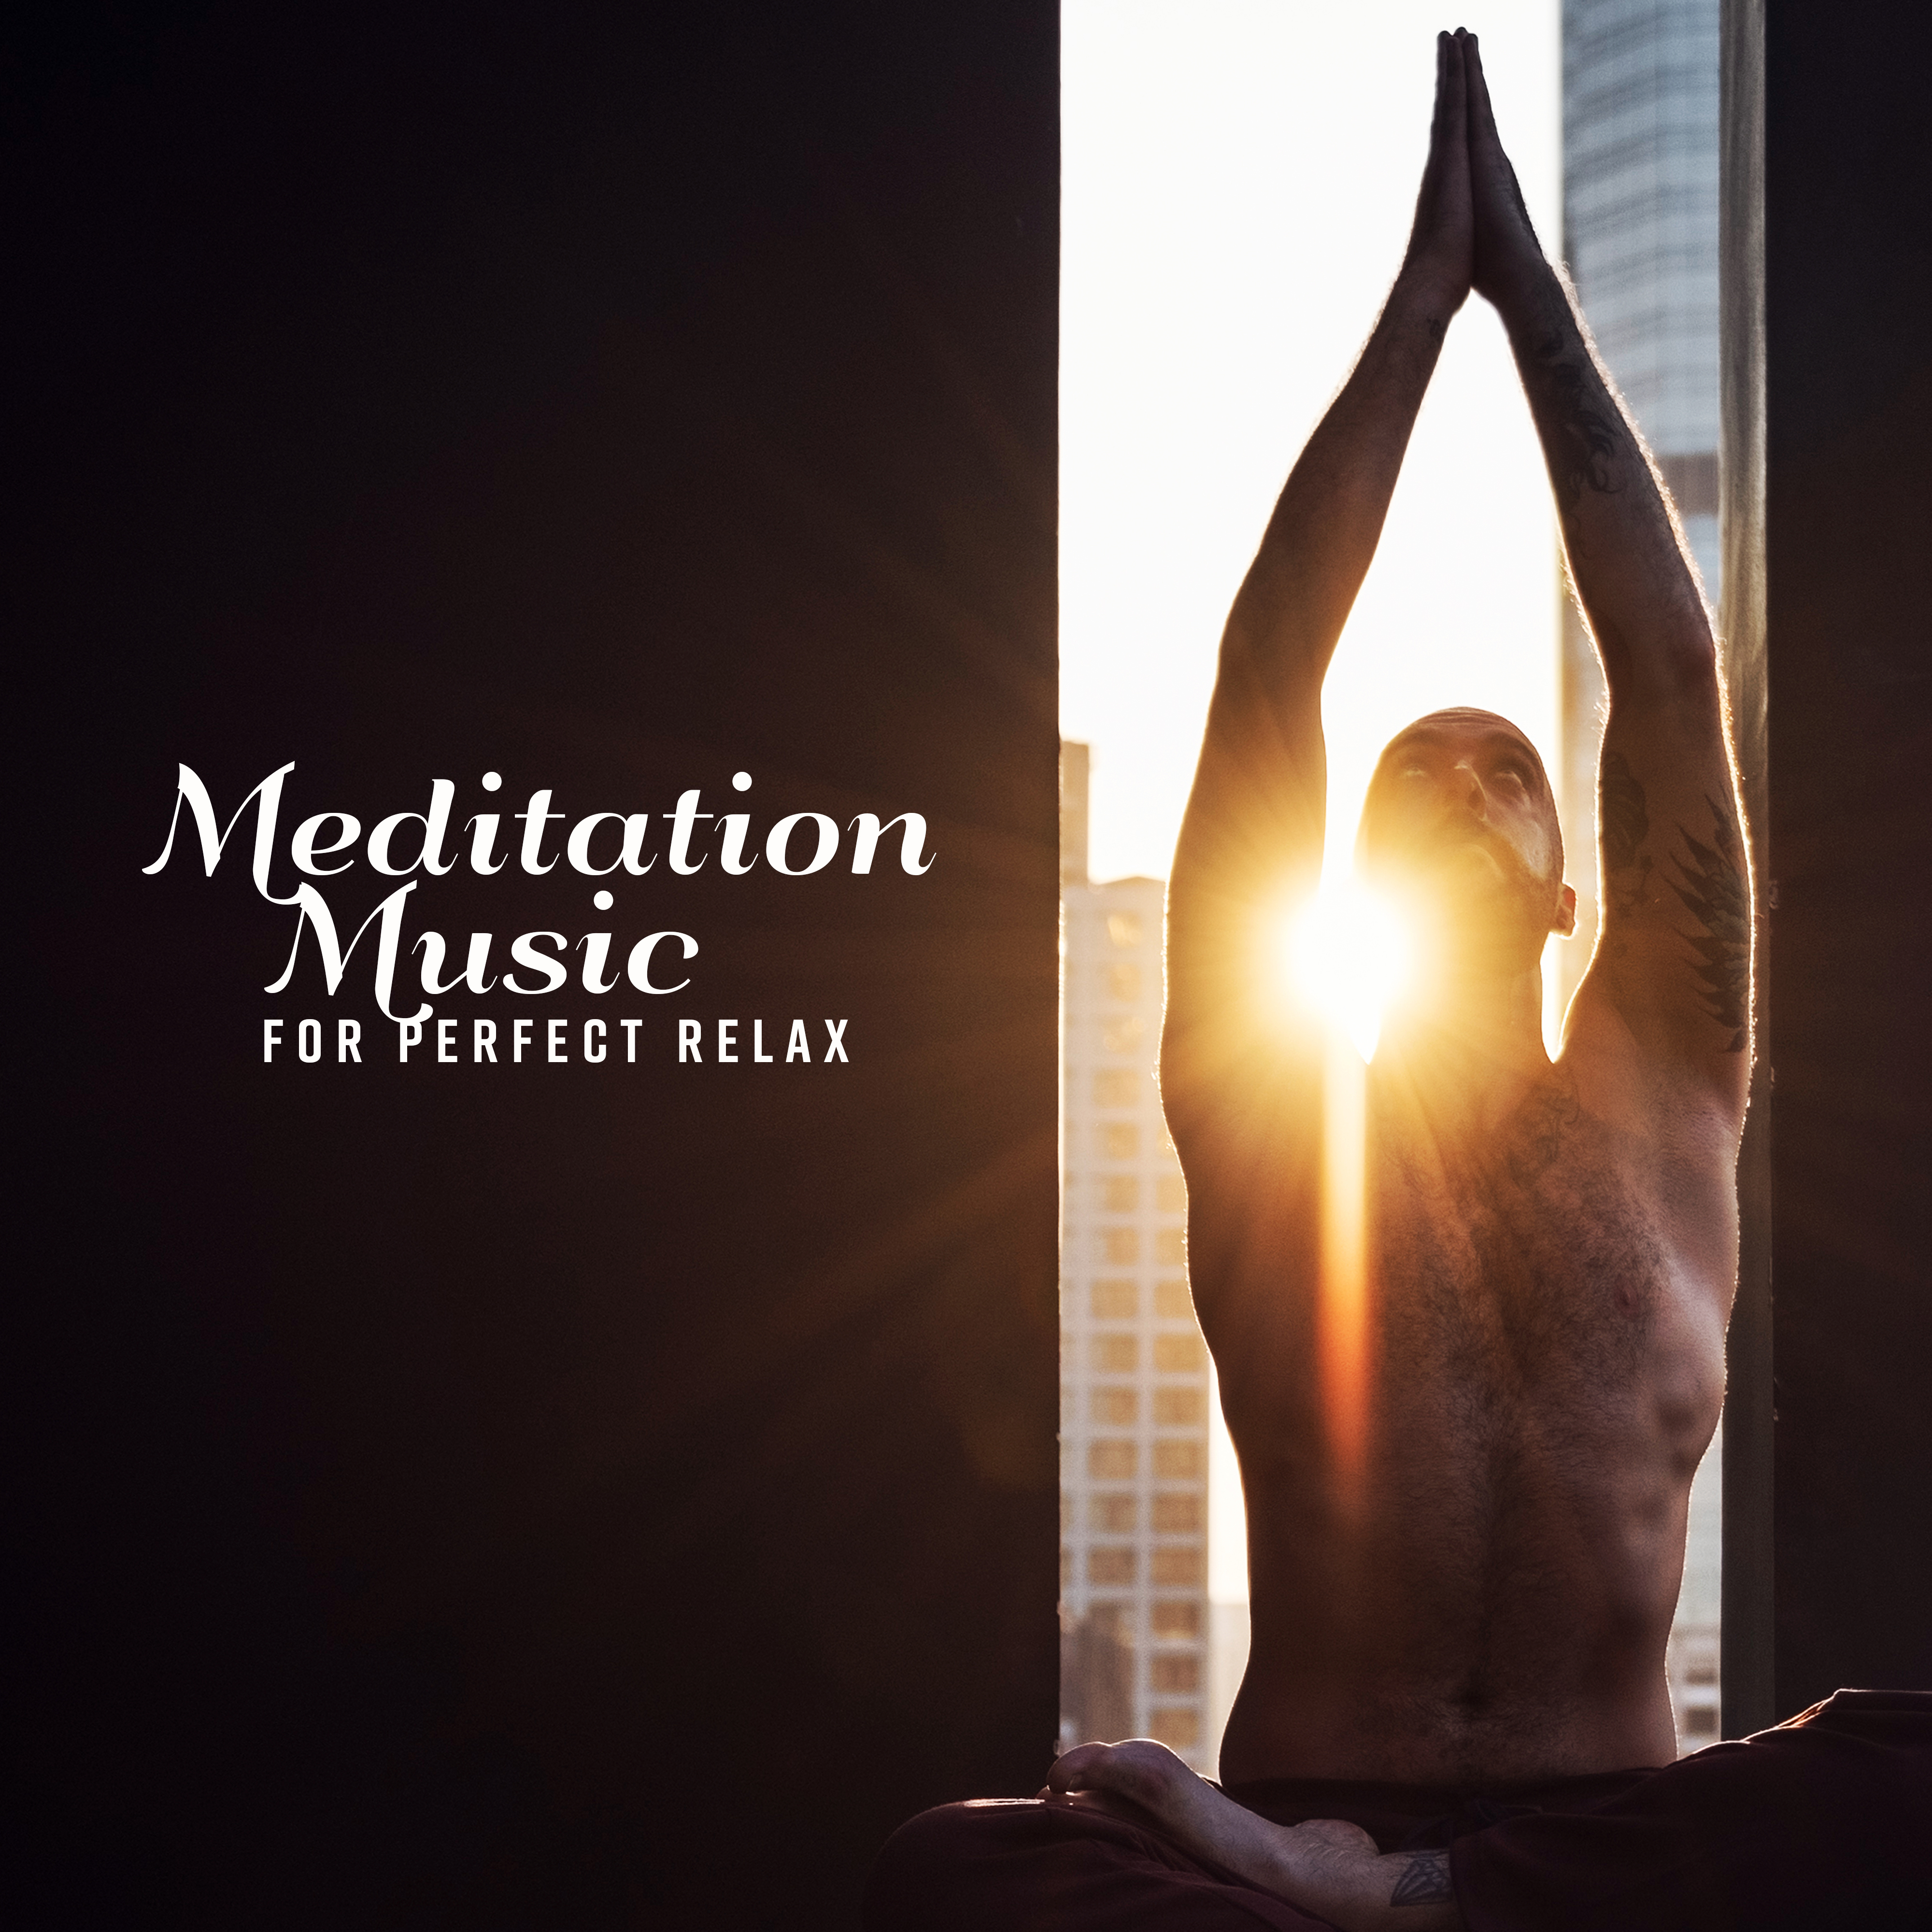 Meditation Music for Perfect Relax